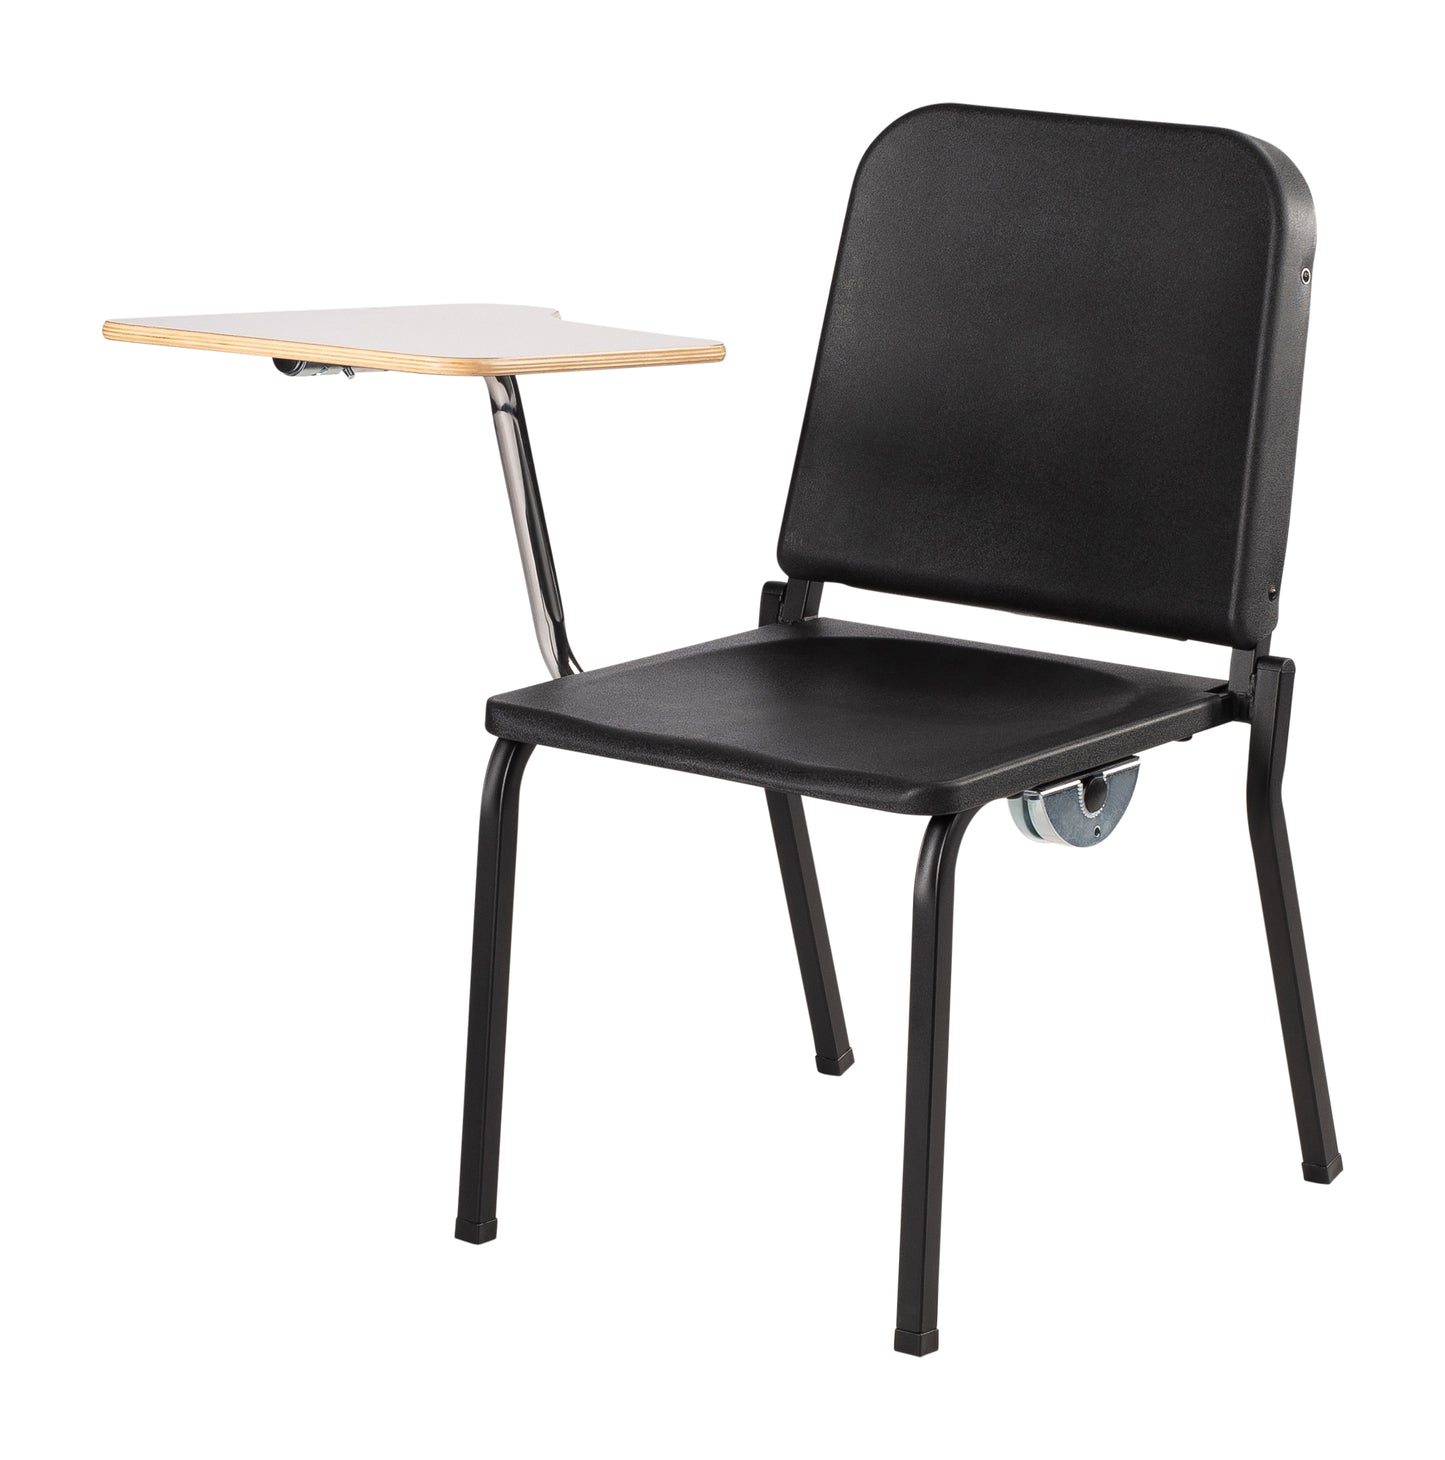 NPS 8200 Series Melody Music Chair, 16"H, Black (National Public Seating NPS-8210-16) - SchoolOutlet